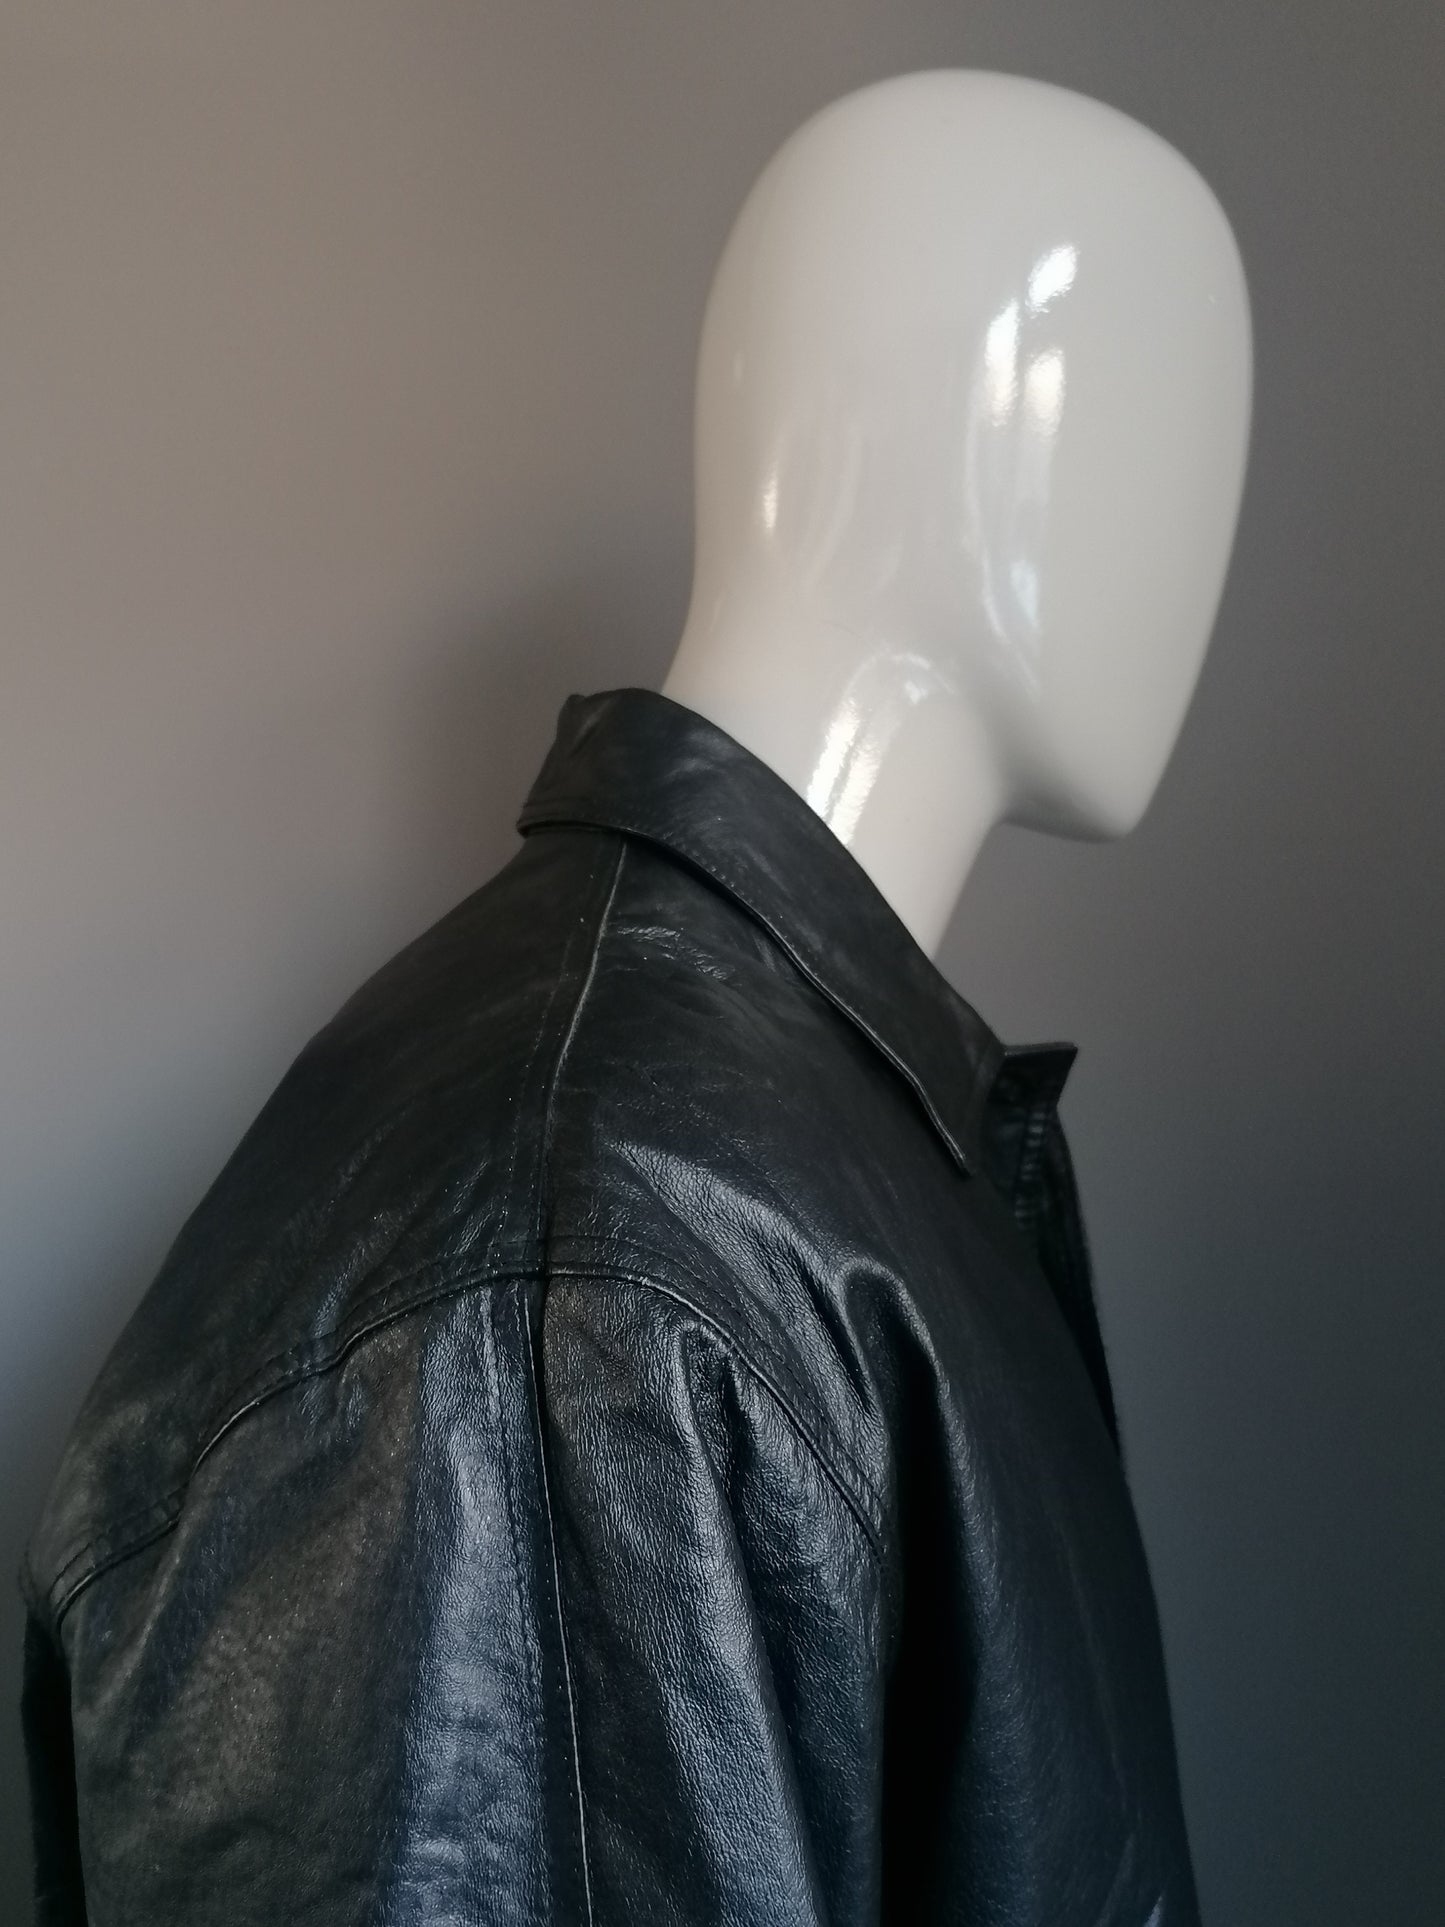 Tyler half -length leather jacket with beautiful buttons. Fed. Black colored. Size XL.